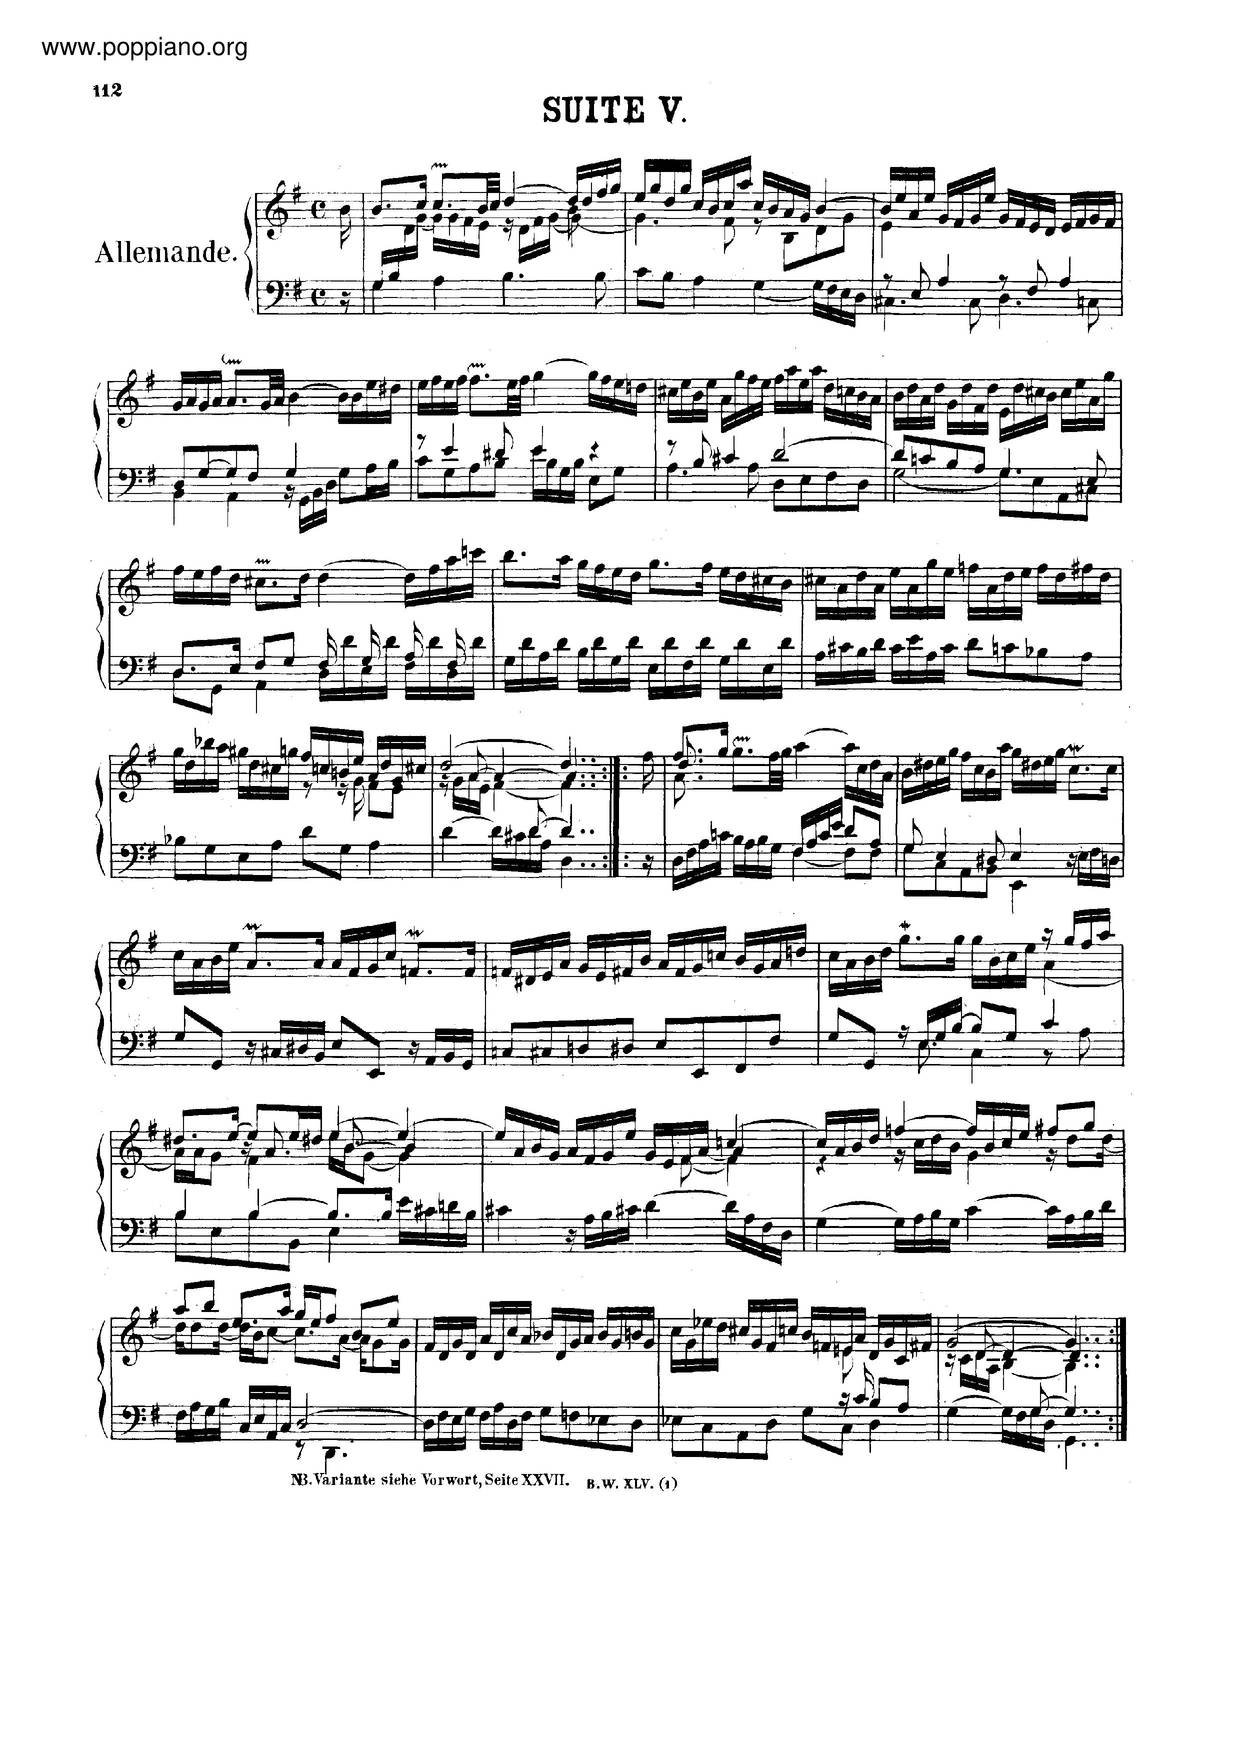 French Suite No. 5 In G Major, BWV 816琴譜